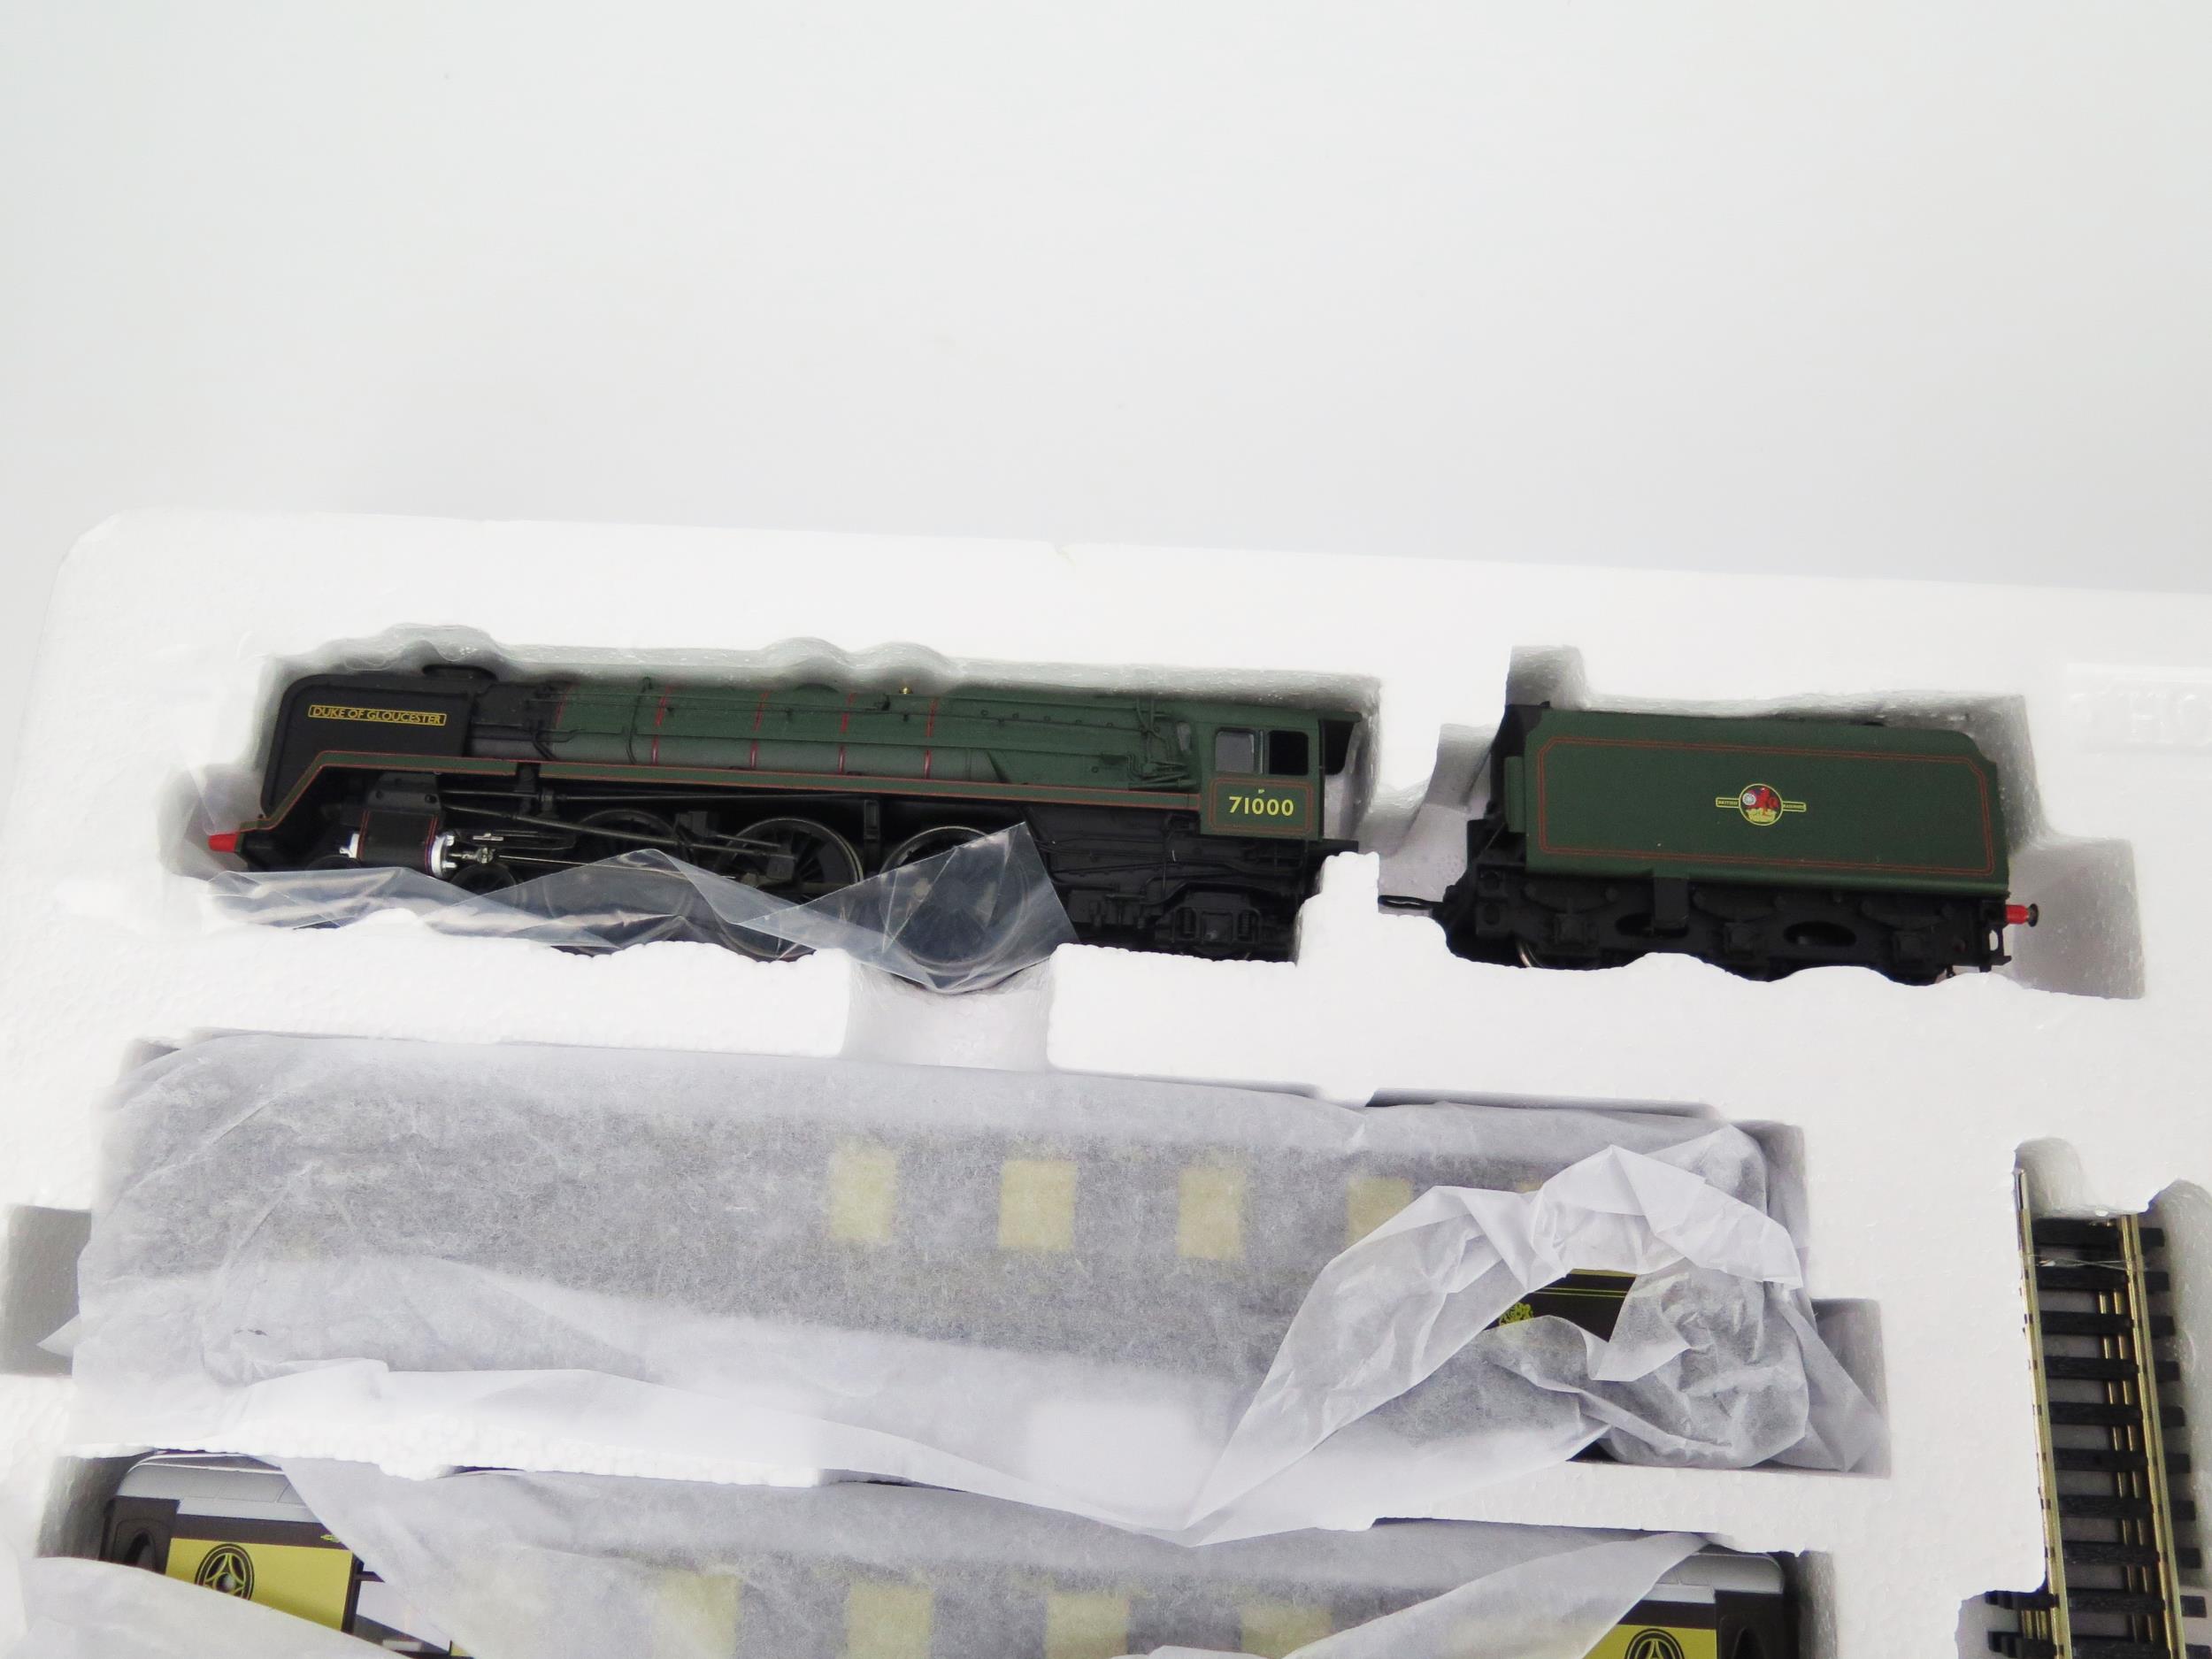 Hornby OO Gauge R1177 Gloucester City Pullman Train Set, DCC Ready - excellent in box - Image 2 of 4